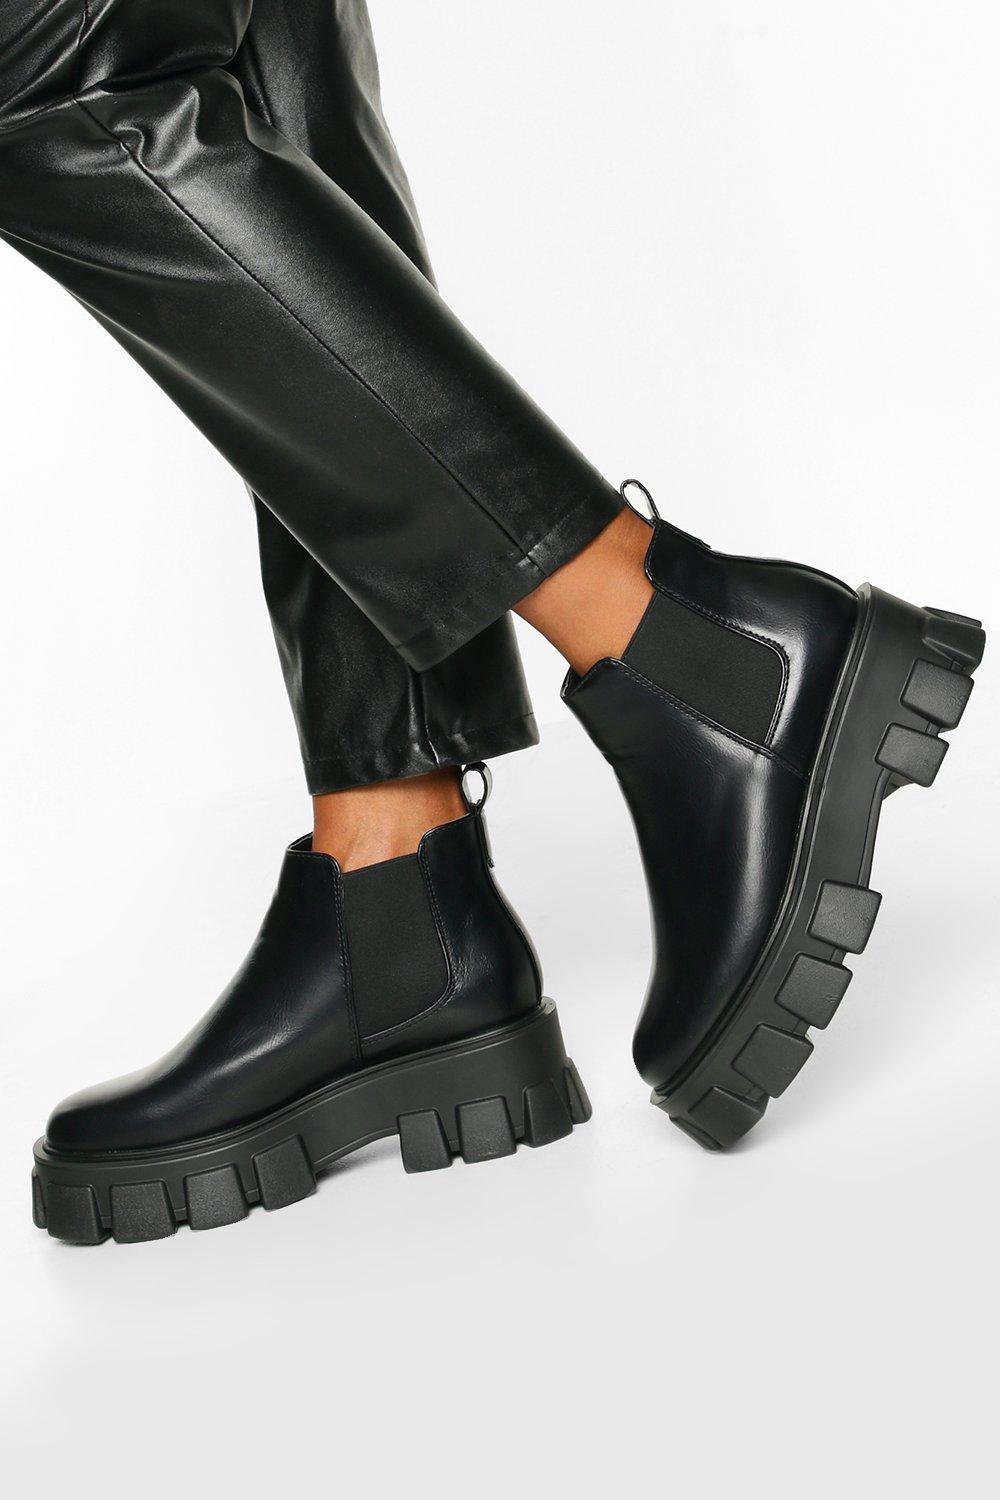 burberry chelsea boots mens